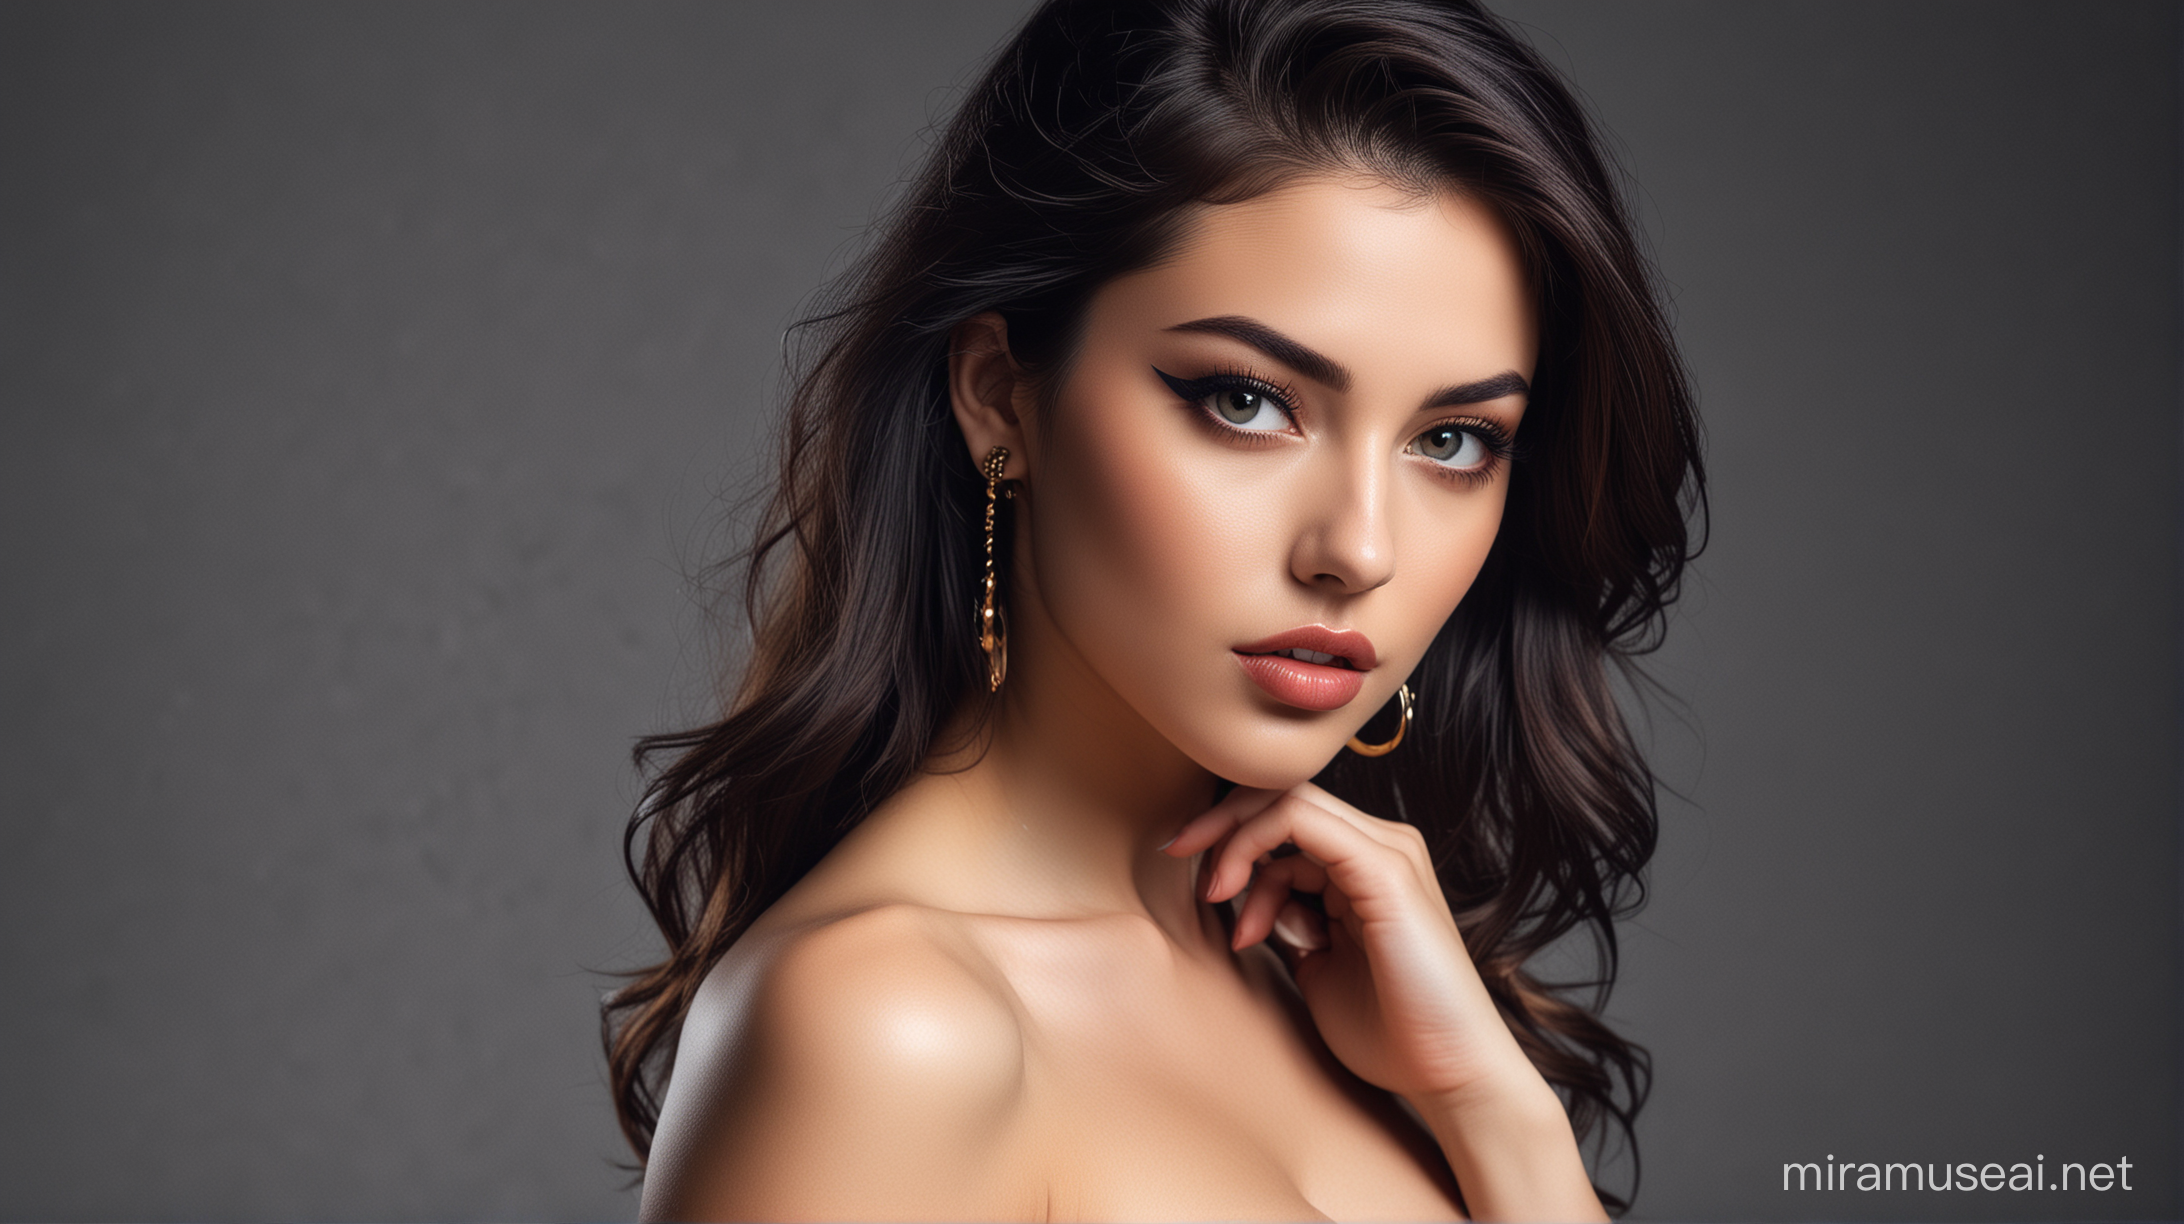 "Experience the ultimate visual feast with our collection of high resolution 8k wallpapers featuring stunningly beautiful models in various poses and styles. From sultry seductresses to fierce fashionistas, our graphic masters have created a diverse range of images that will leave you breathless."